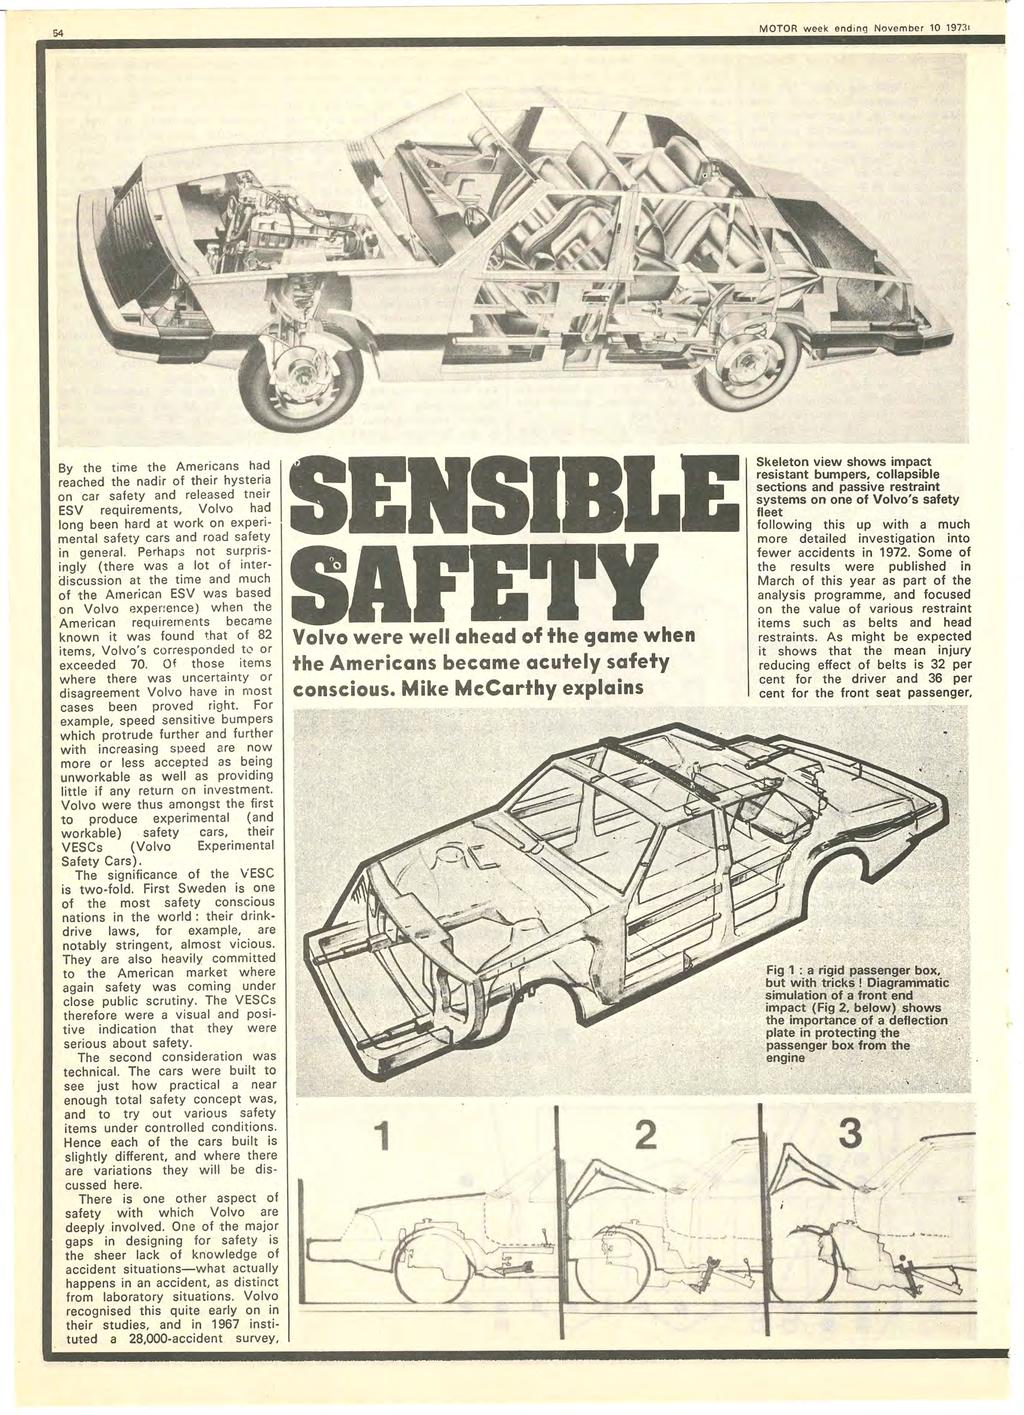 54 MOTOR we>ek ending November 10 1973' By the t ime the Americans had reached the nadir of their hysteria on car safety and relea,sed tneir ESV requirements, Volvo had long been hard at work on